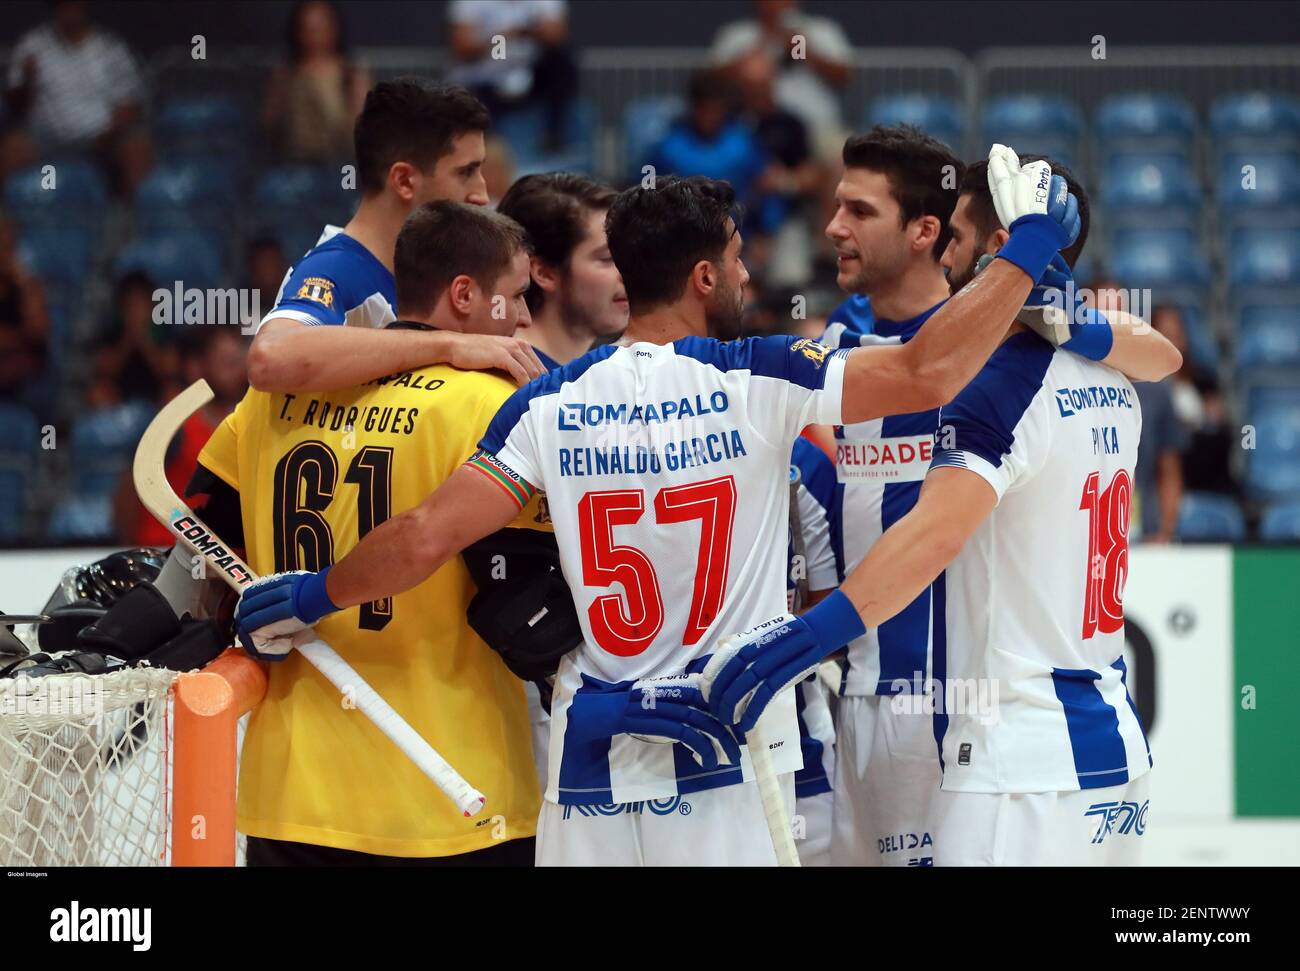 Portimão, 09/22/2019 - Roller Hockey - Sporting CP and FC Porto played this  afternoon the Elite Cup 2019 Final at Portimão Arena. FC Porto celebration;  (André Vidigal / Global Images/Sipa USA Stock Photo - Alamy